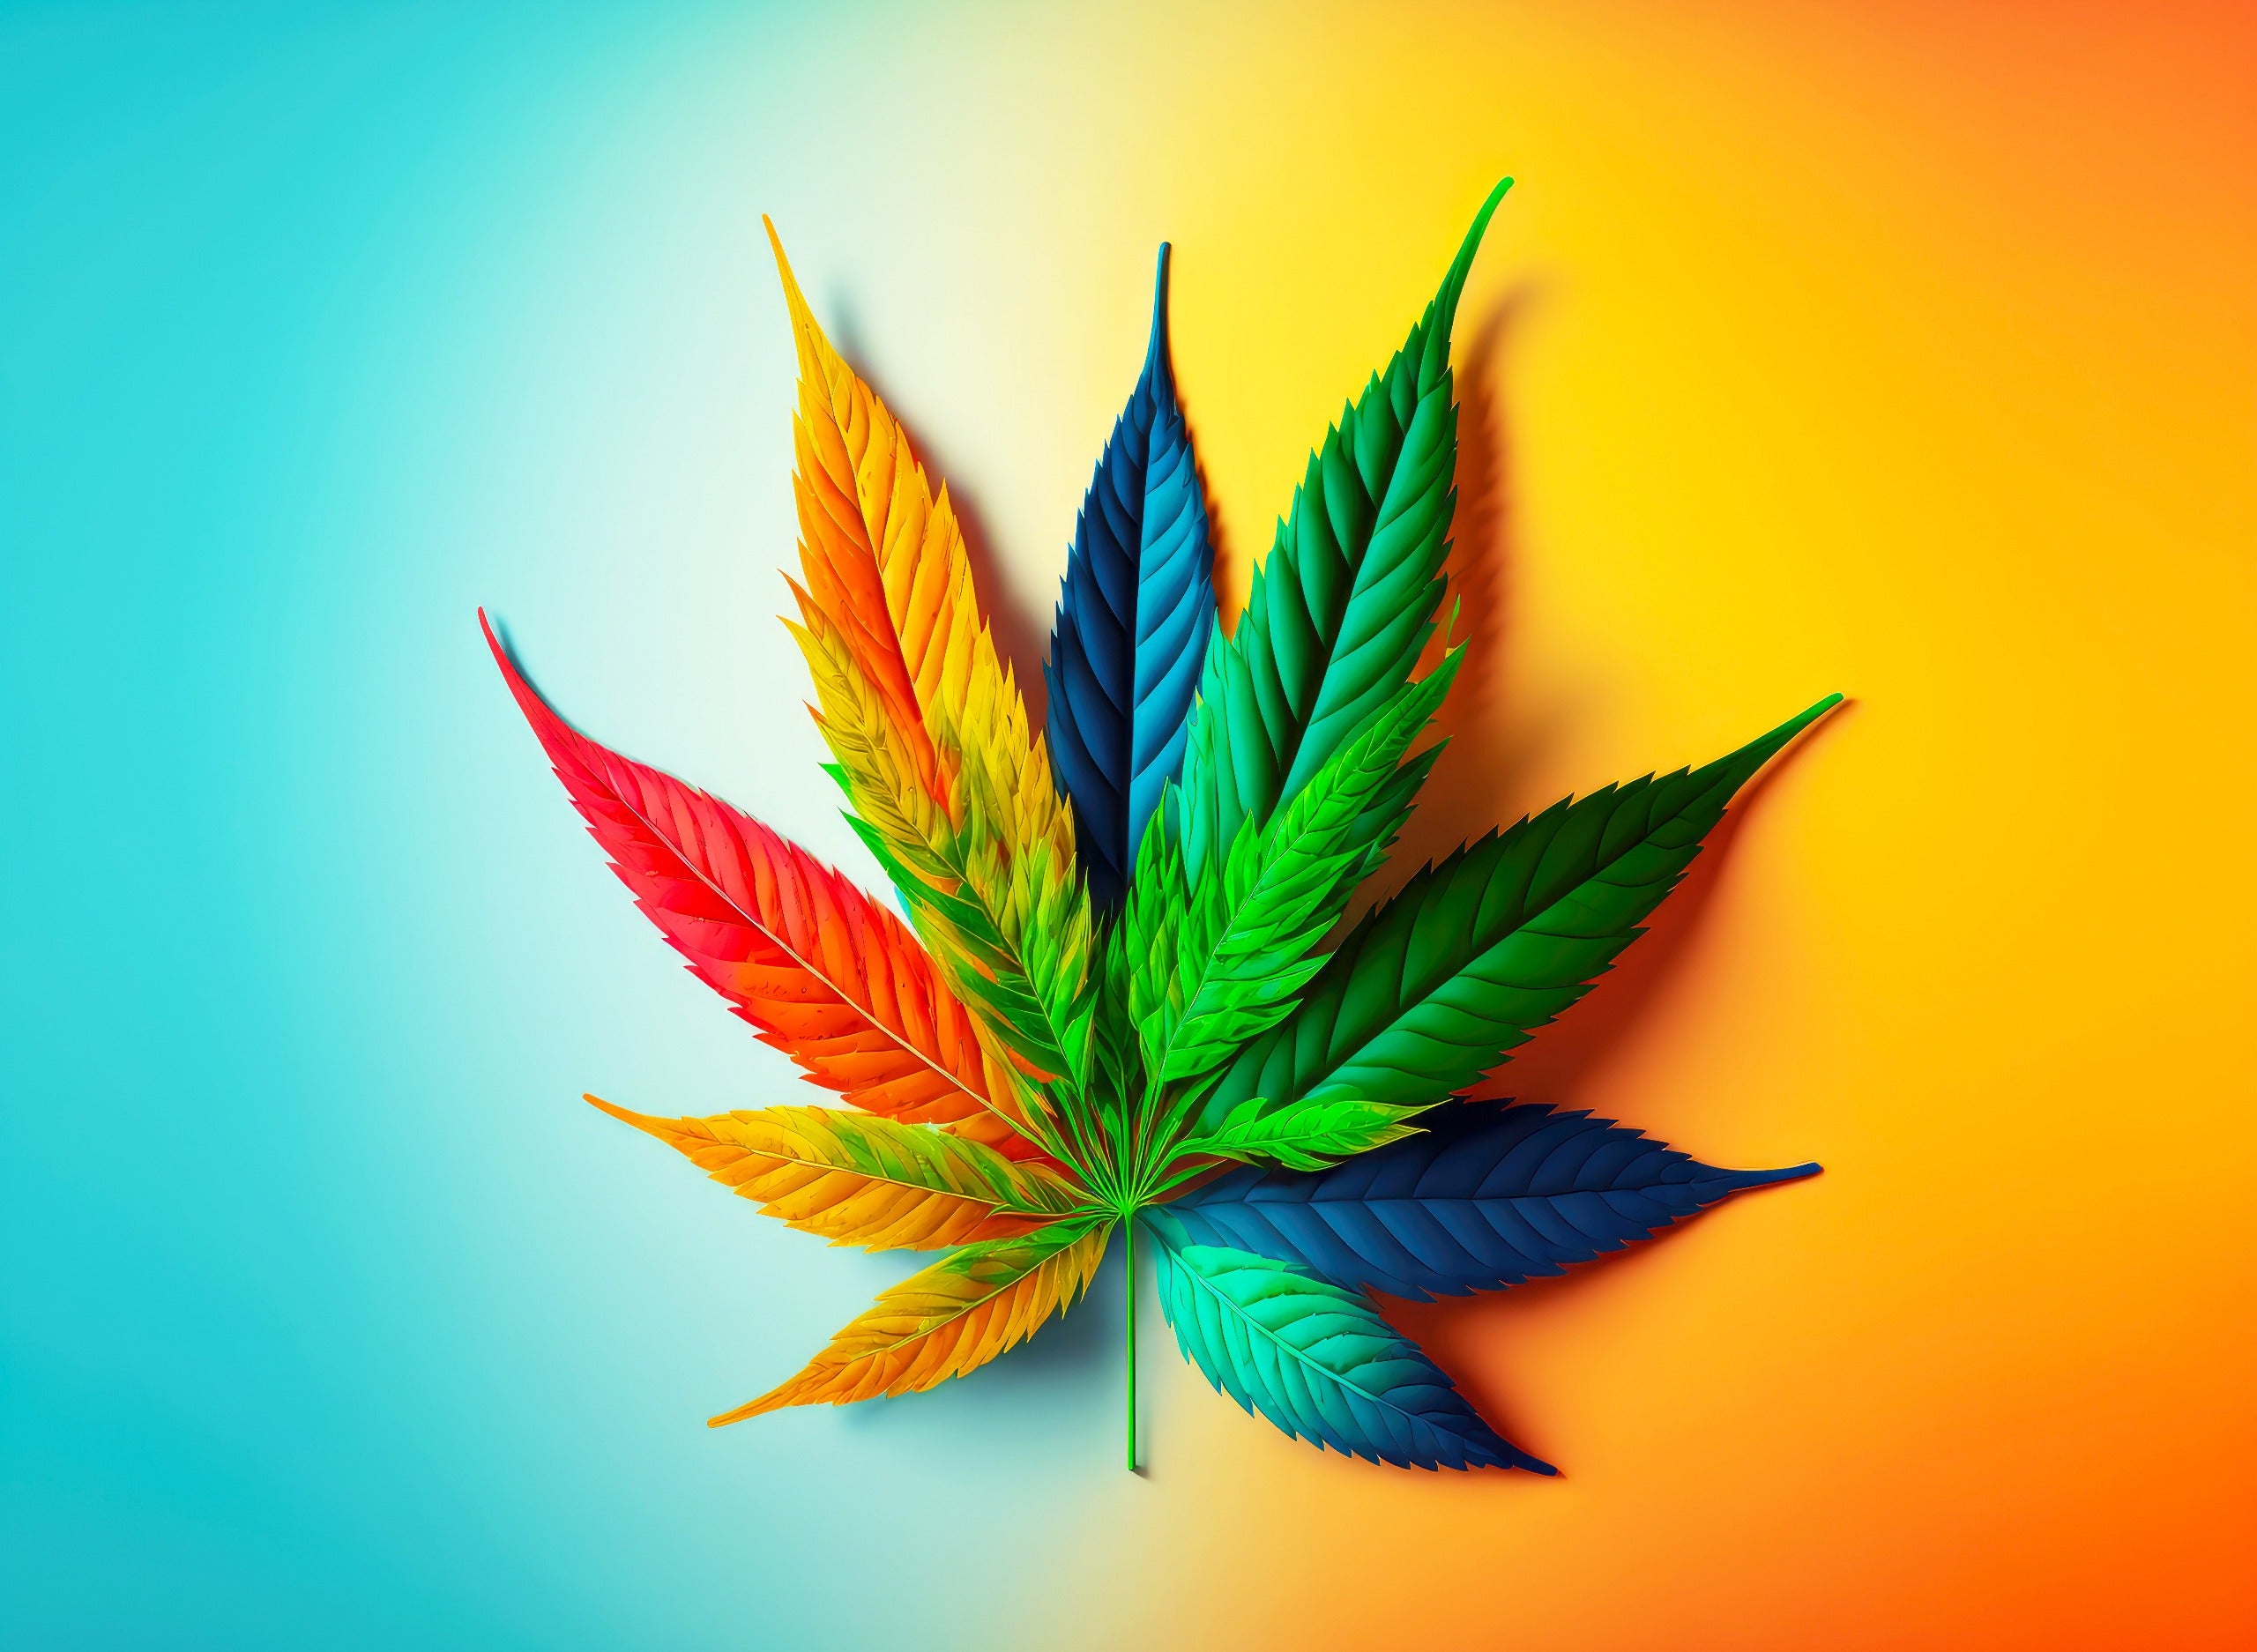 What Makes Weed Colorful? A Look Into What The Colors Mean